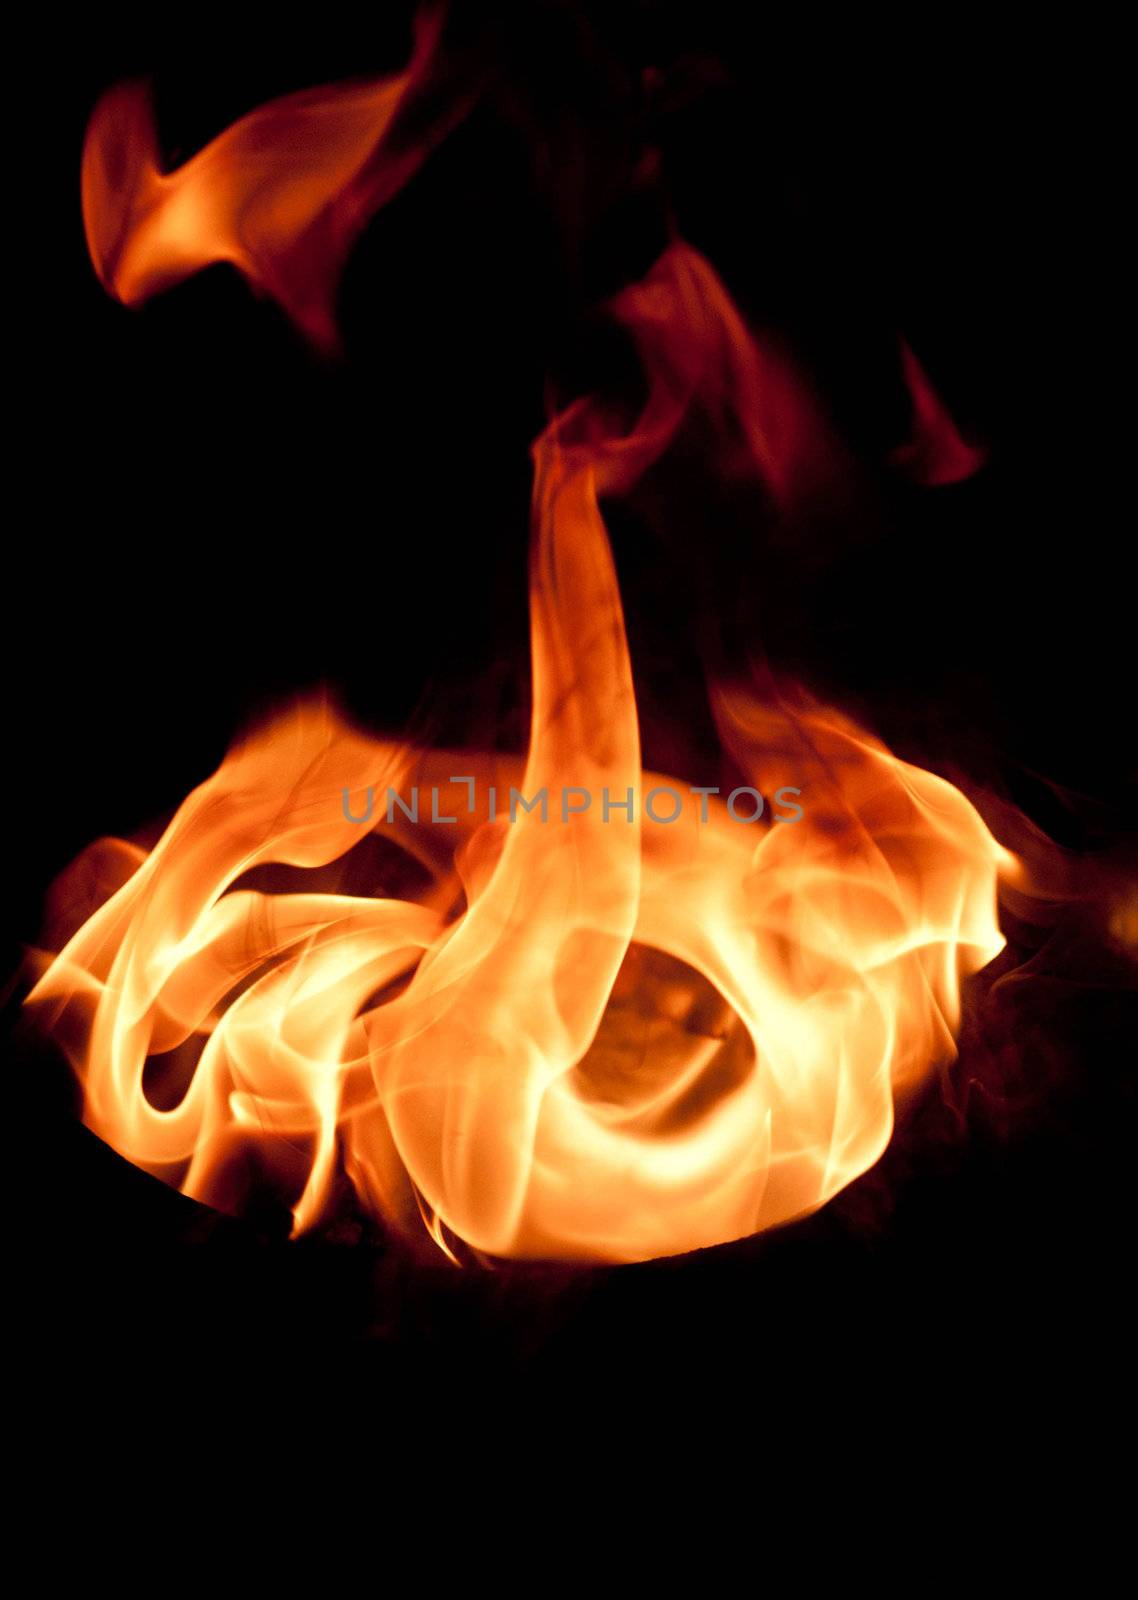 Close up photo of flames burning aggressively